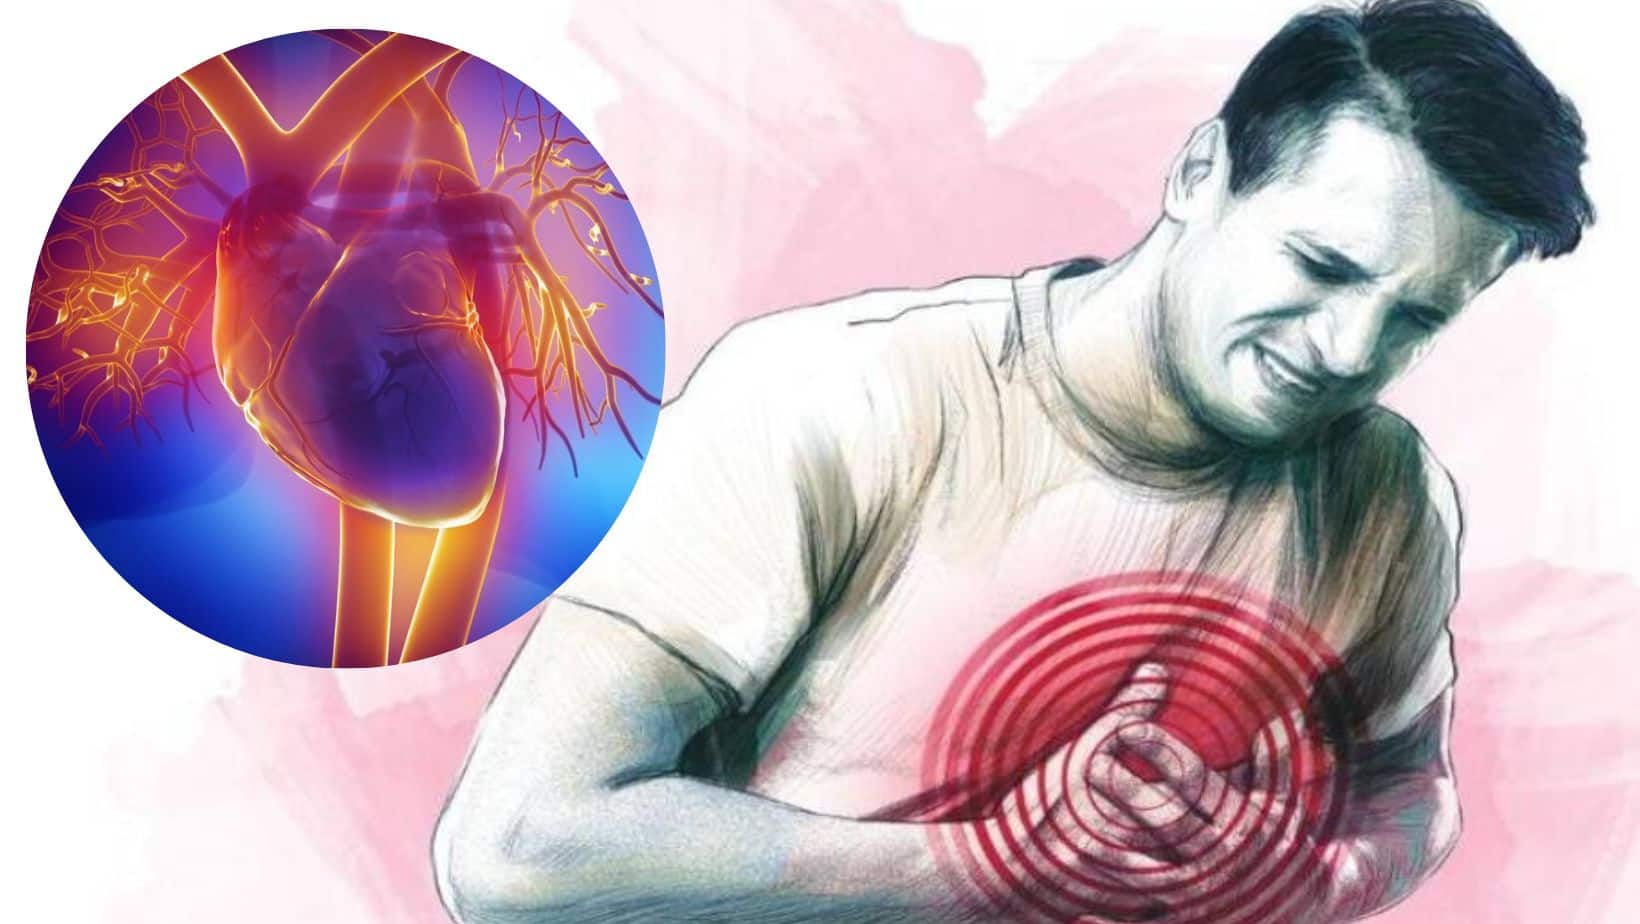 Chest Pain and Then Blockage In The Heart: How 18-Year-Old Succumbed to Massive Heart Attack